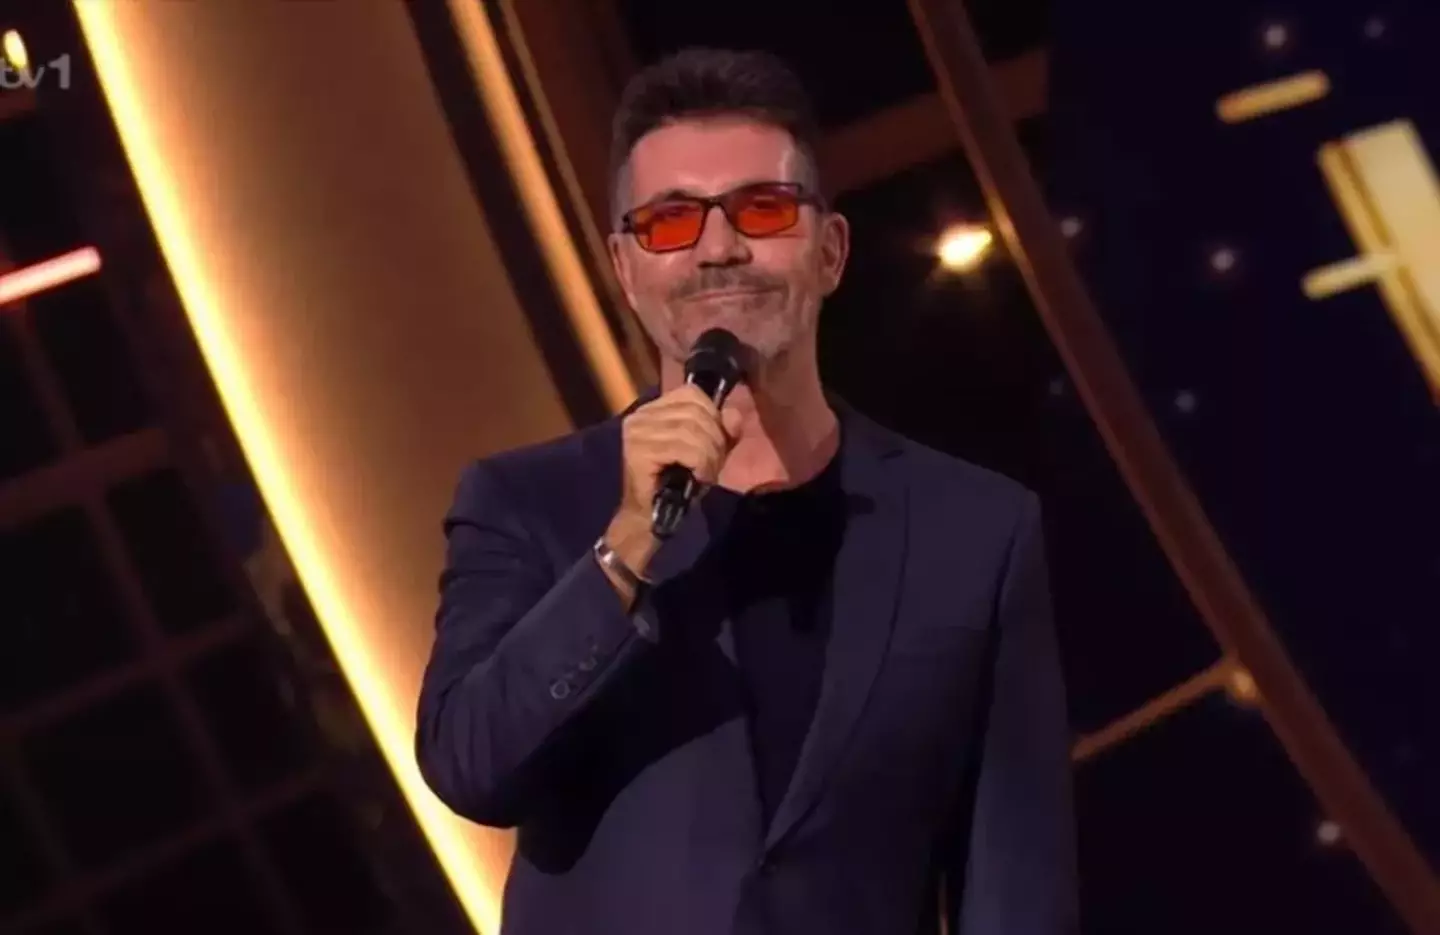 Simon Cowell sported a new look at the Royal Variety.